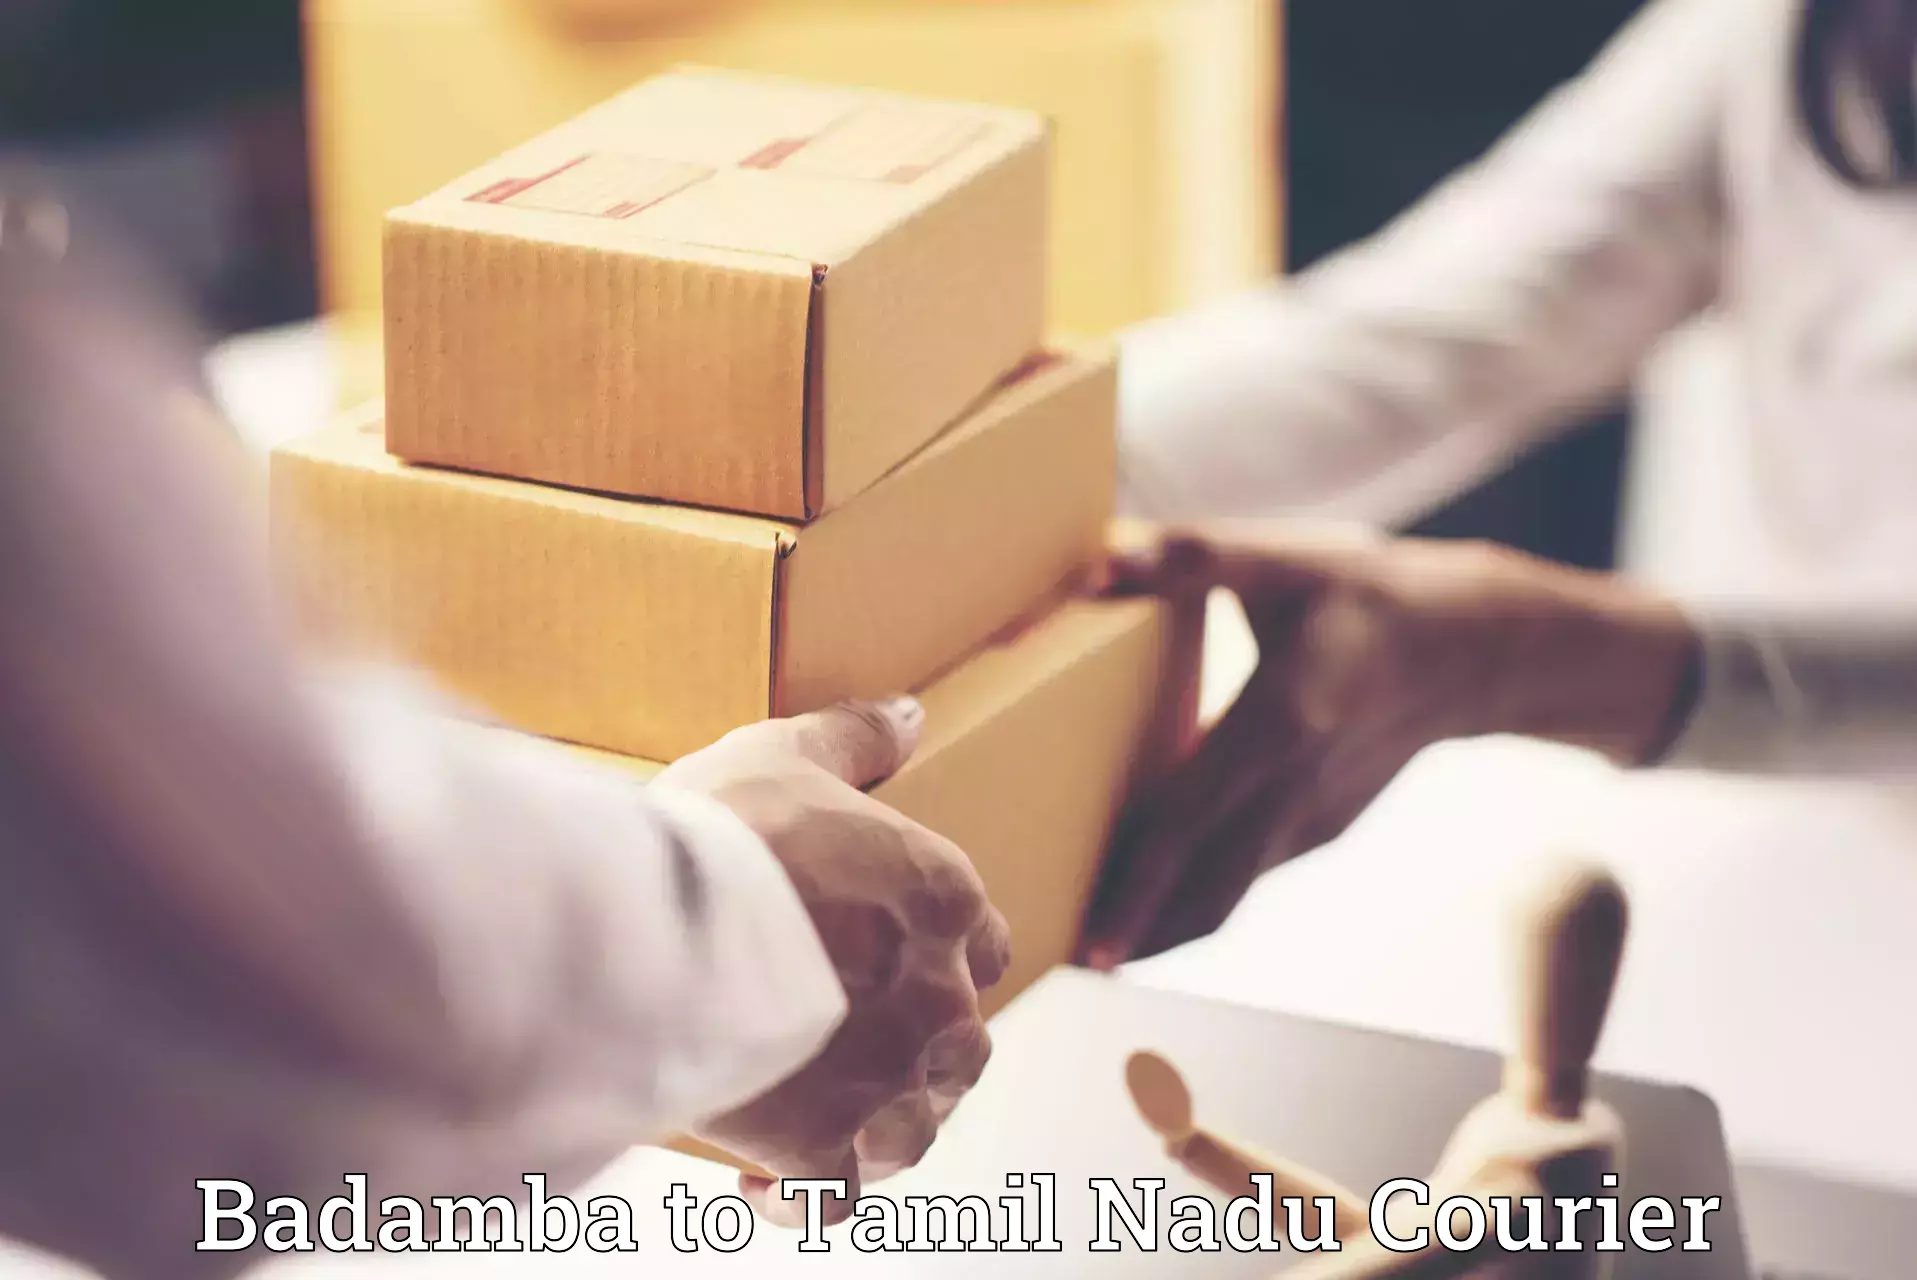 Trusted household movers in Badamba to Tamil Nadu